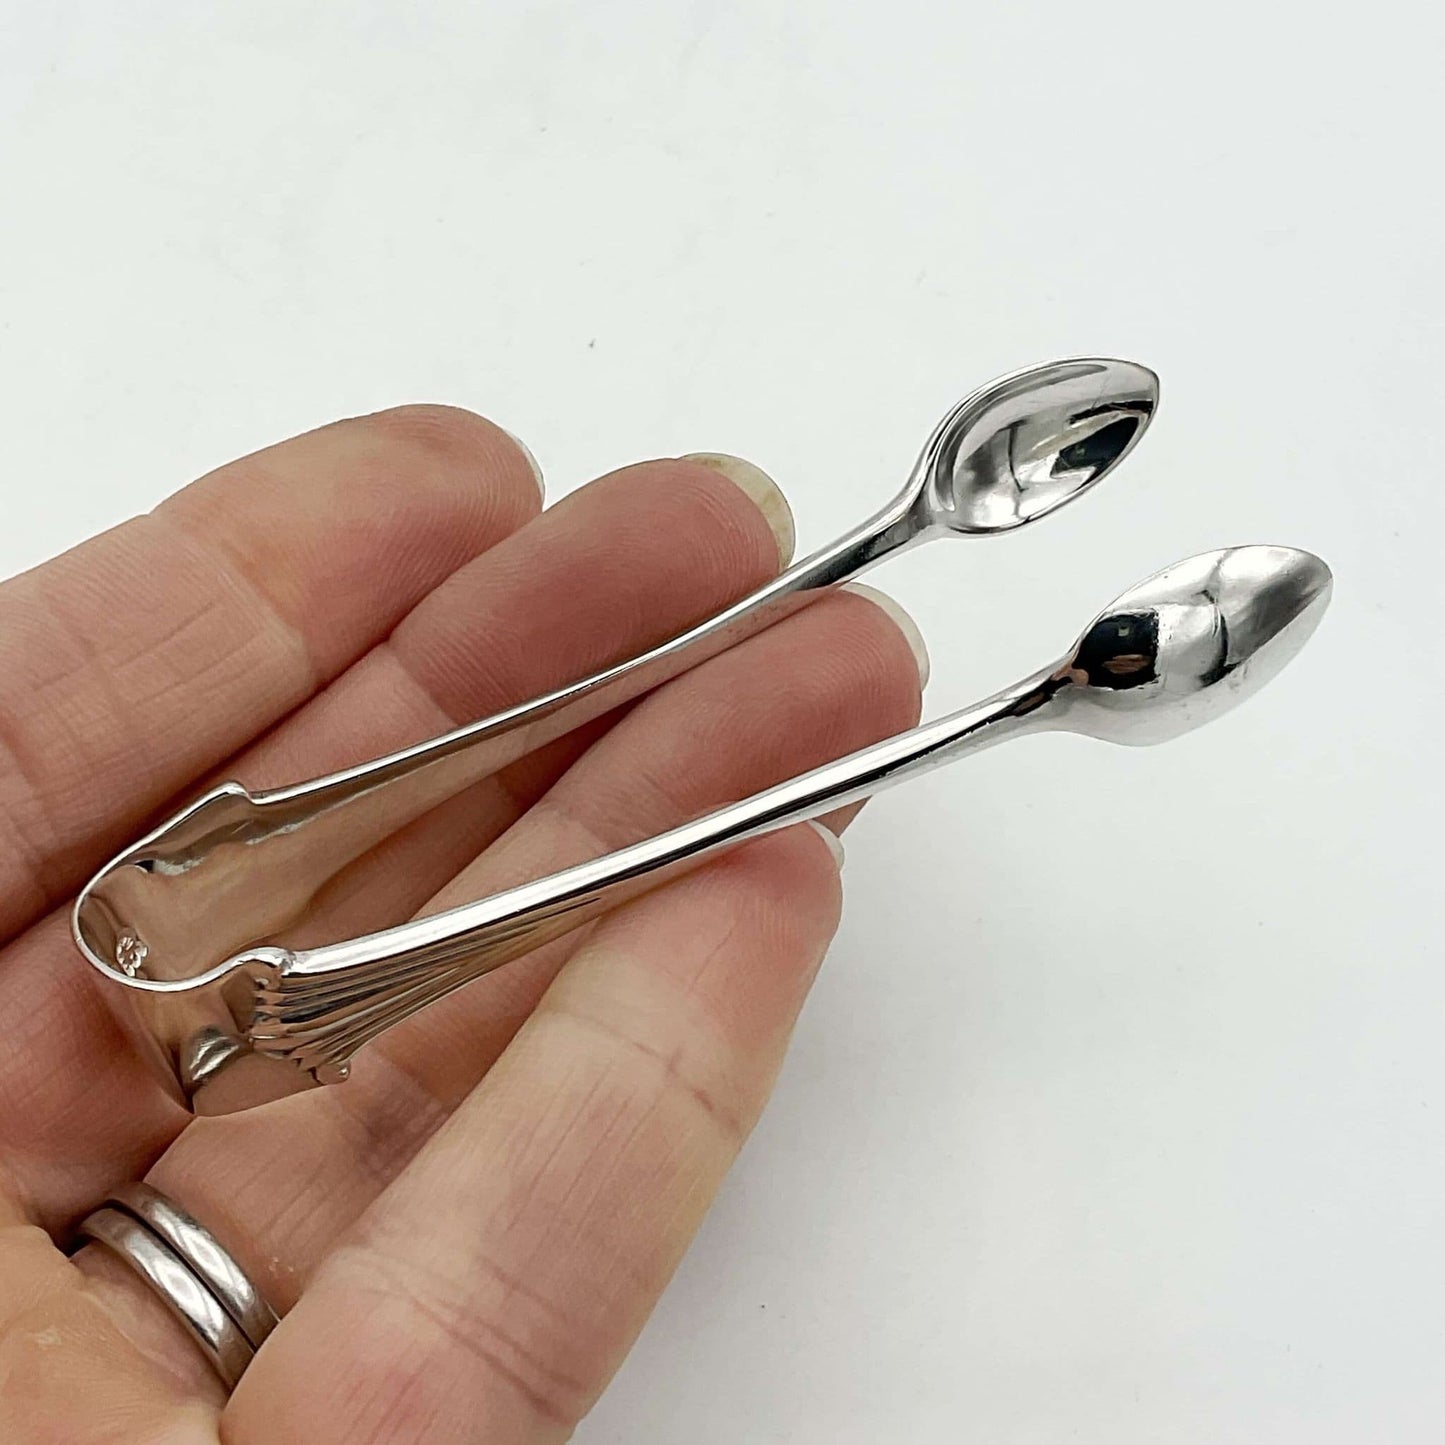 Silver sugar tongs showing an art deco design sitting on fingers